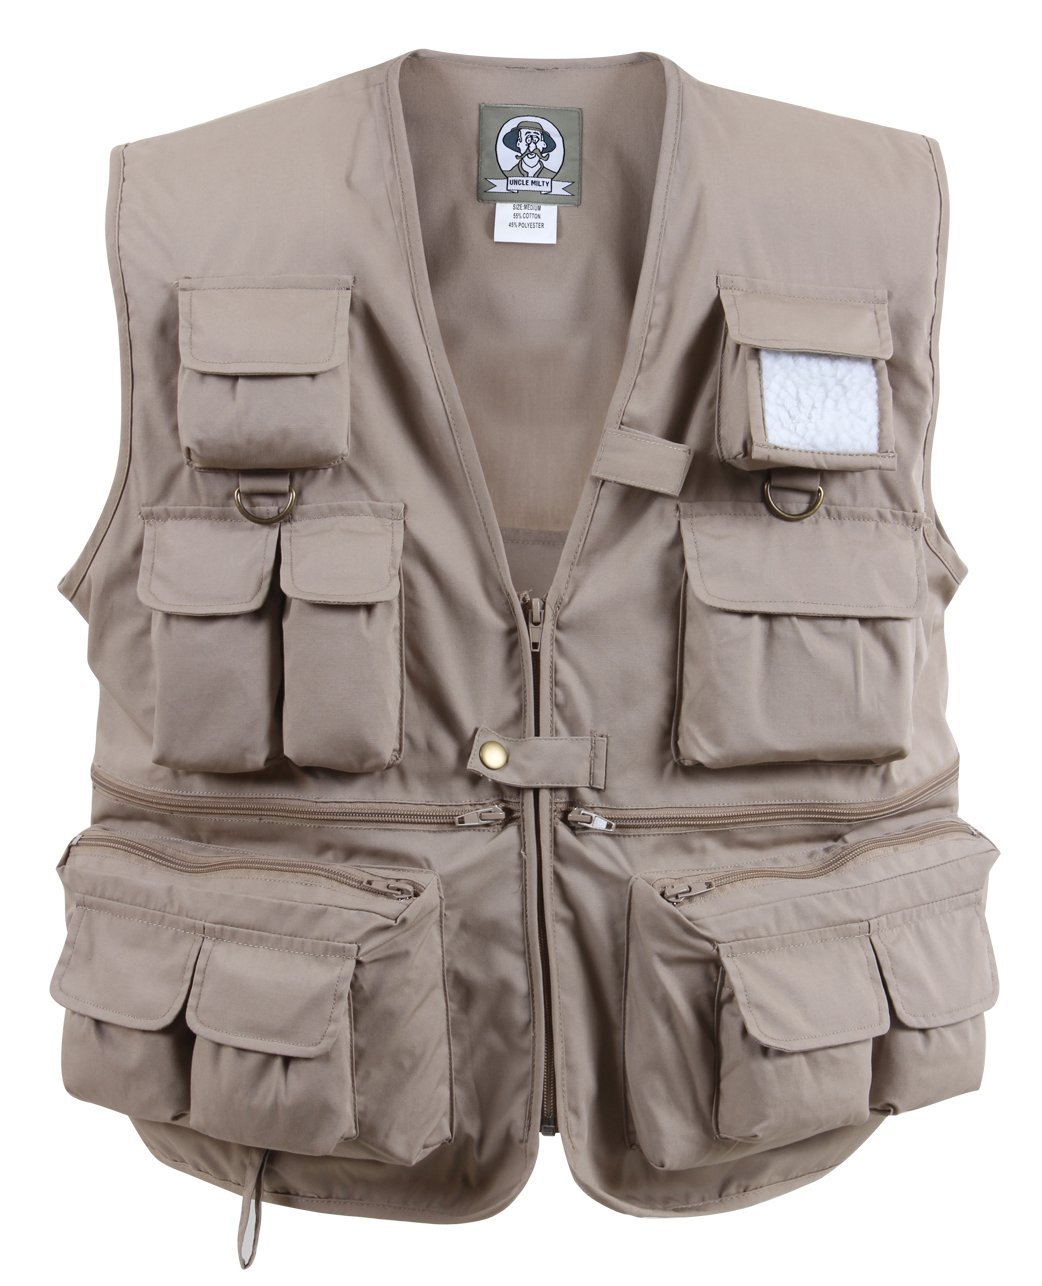 Best Cargo Vests Reviewed & Rated for Quality - TheGearHunt